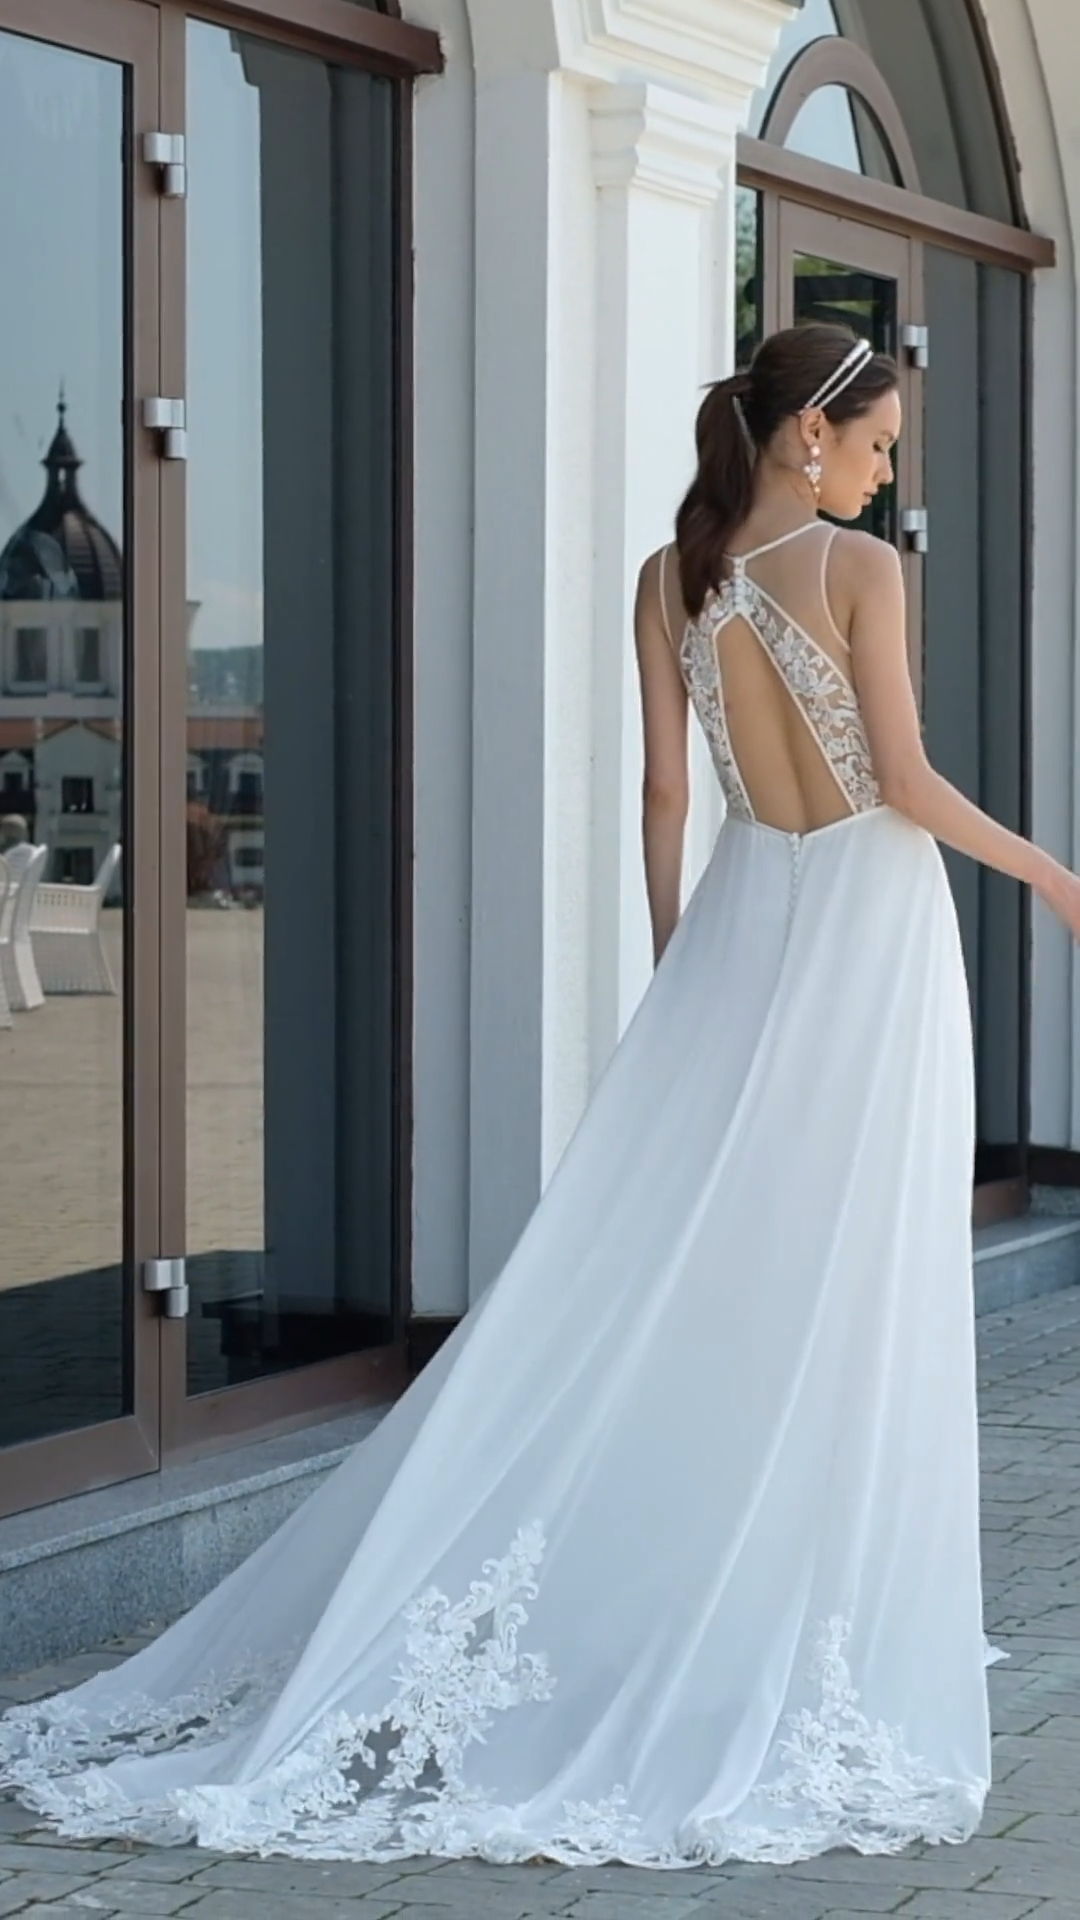 Moonlight Collection J6835 blush bridal gowns, ivory bridal gowns, white wedding dresses & more